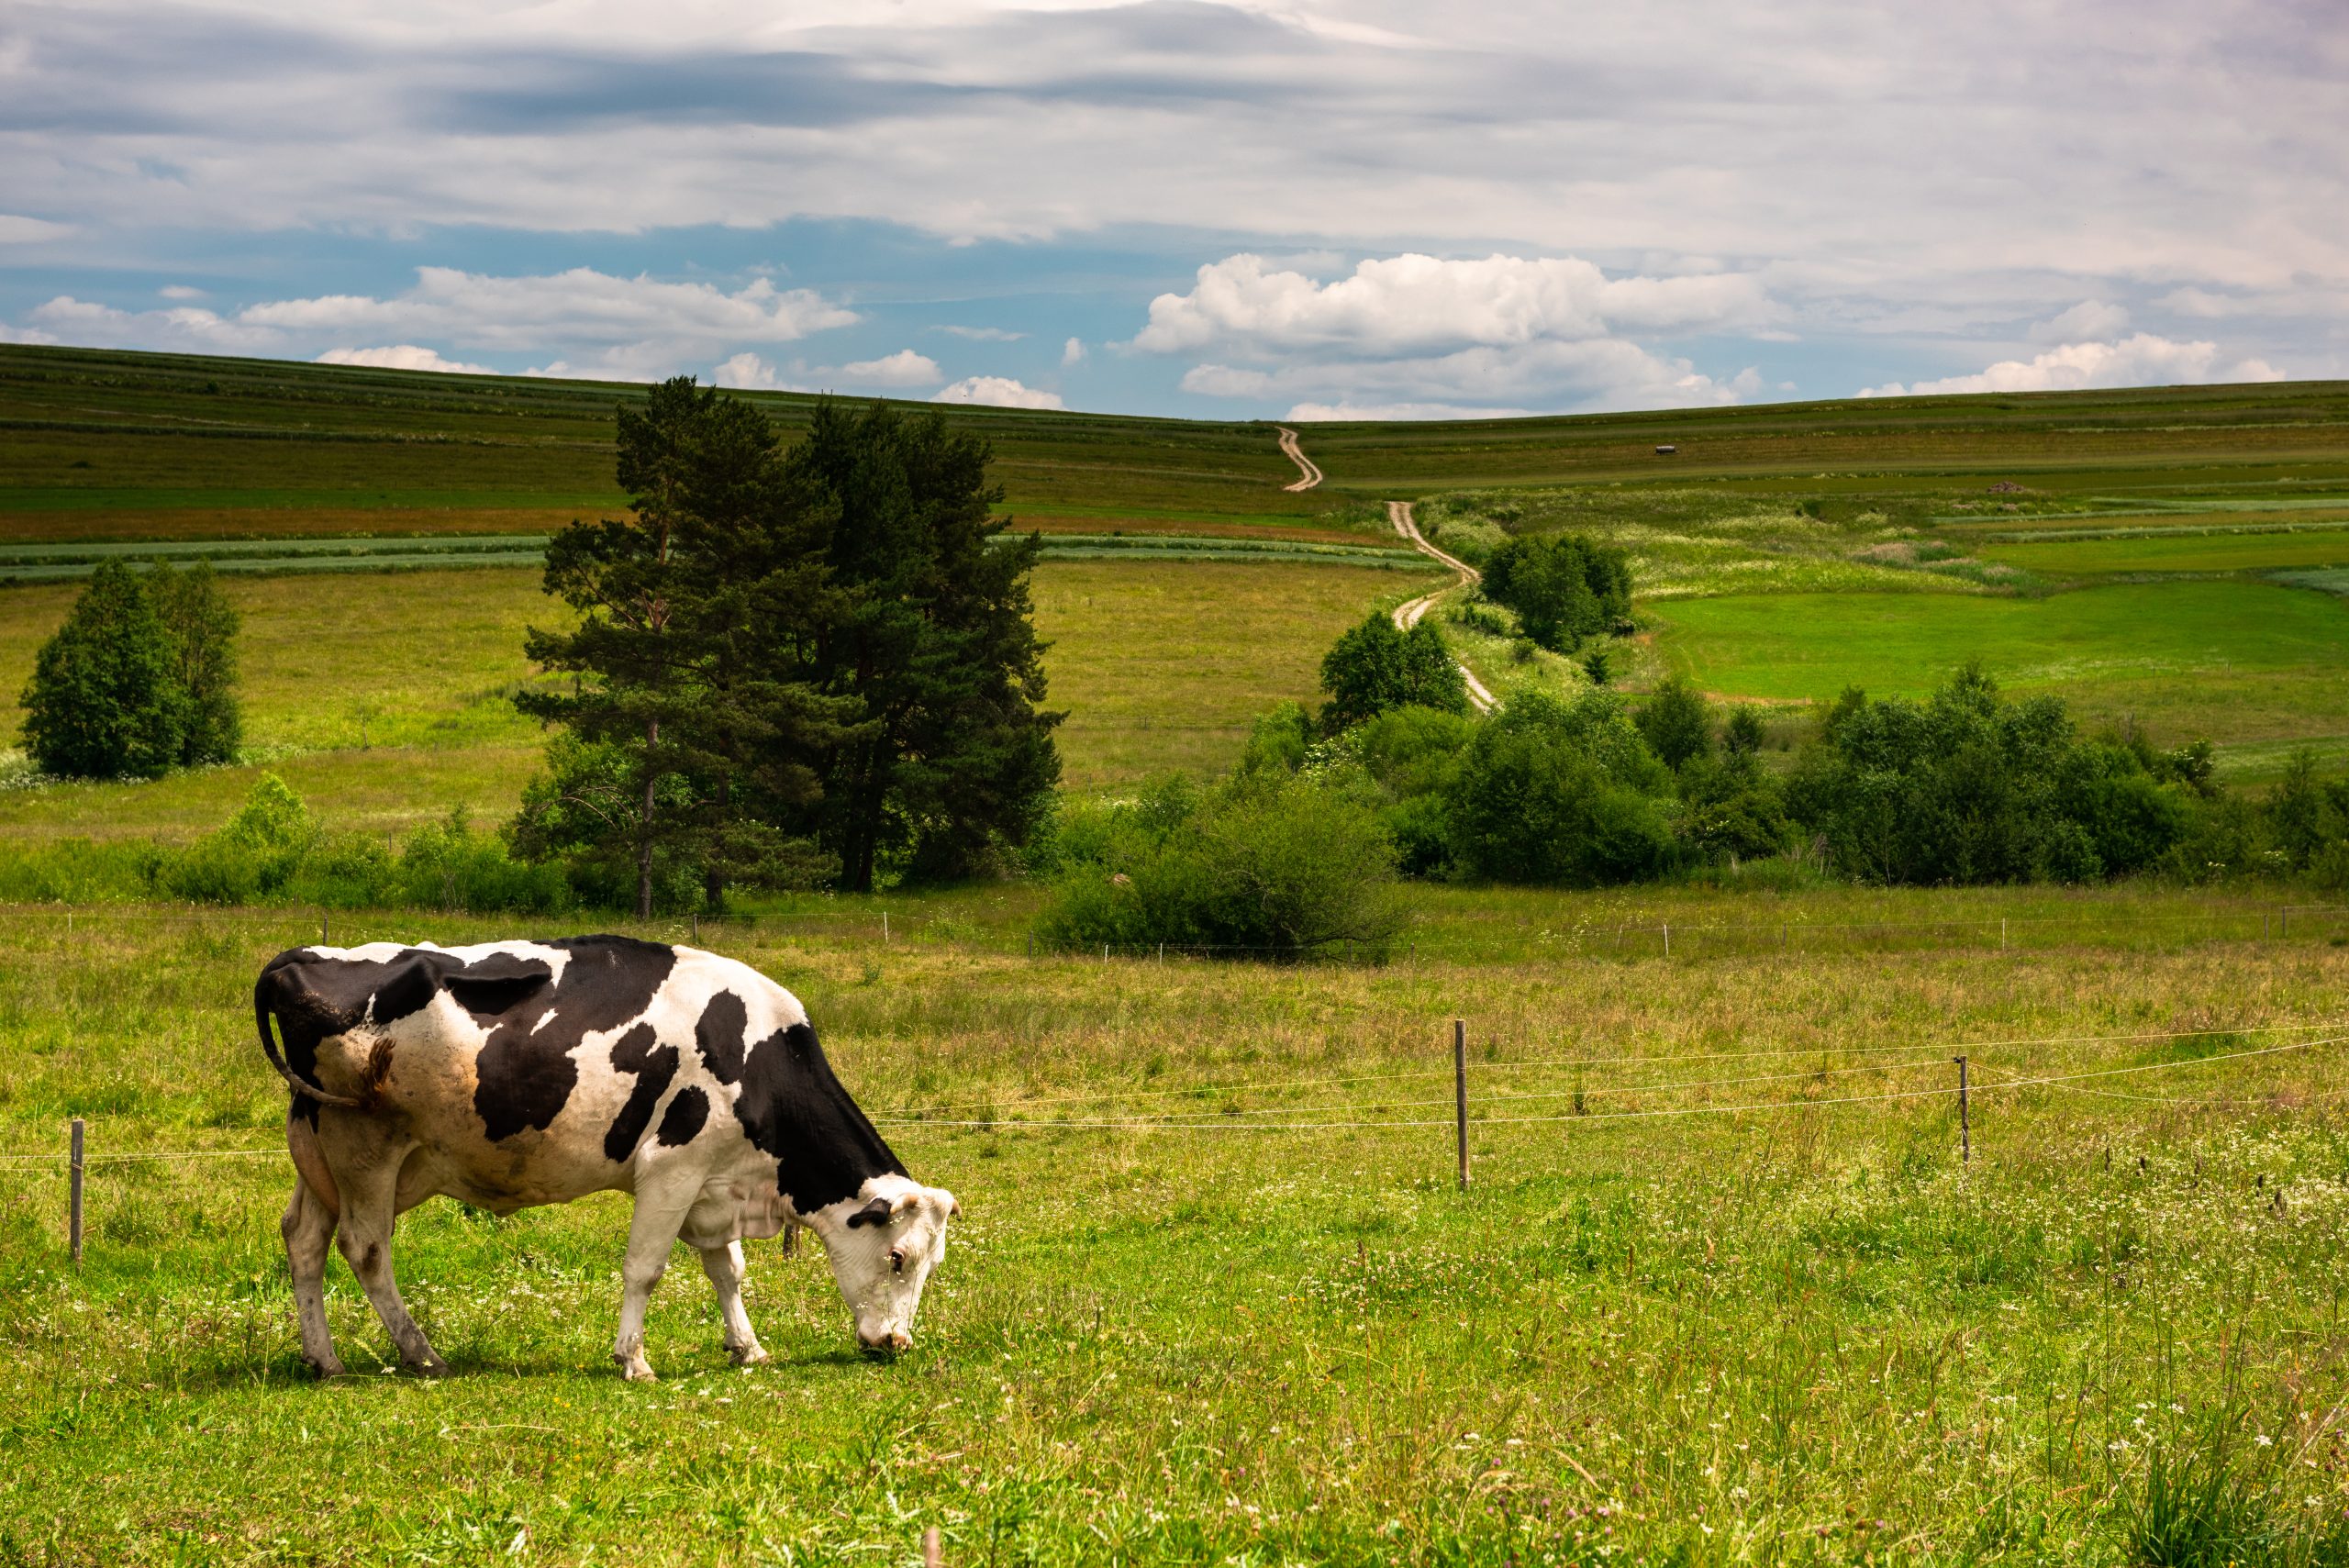 Cow on green grass and agriculture landscape in Poland